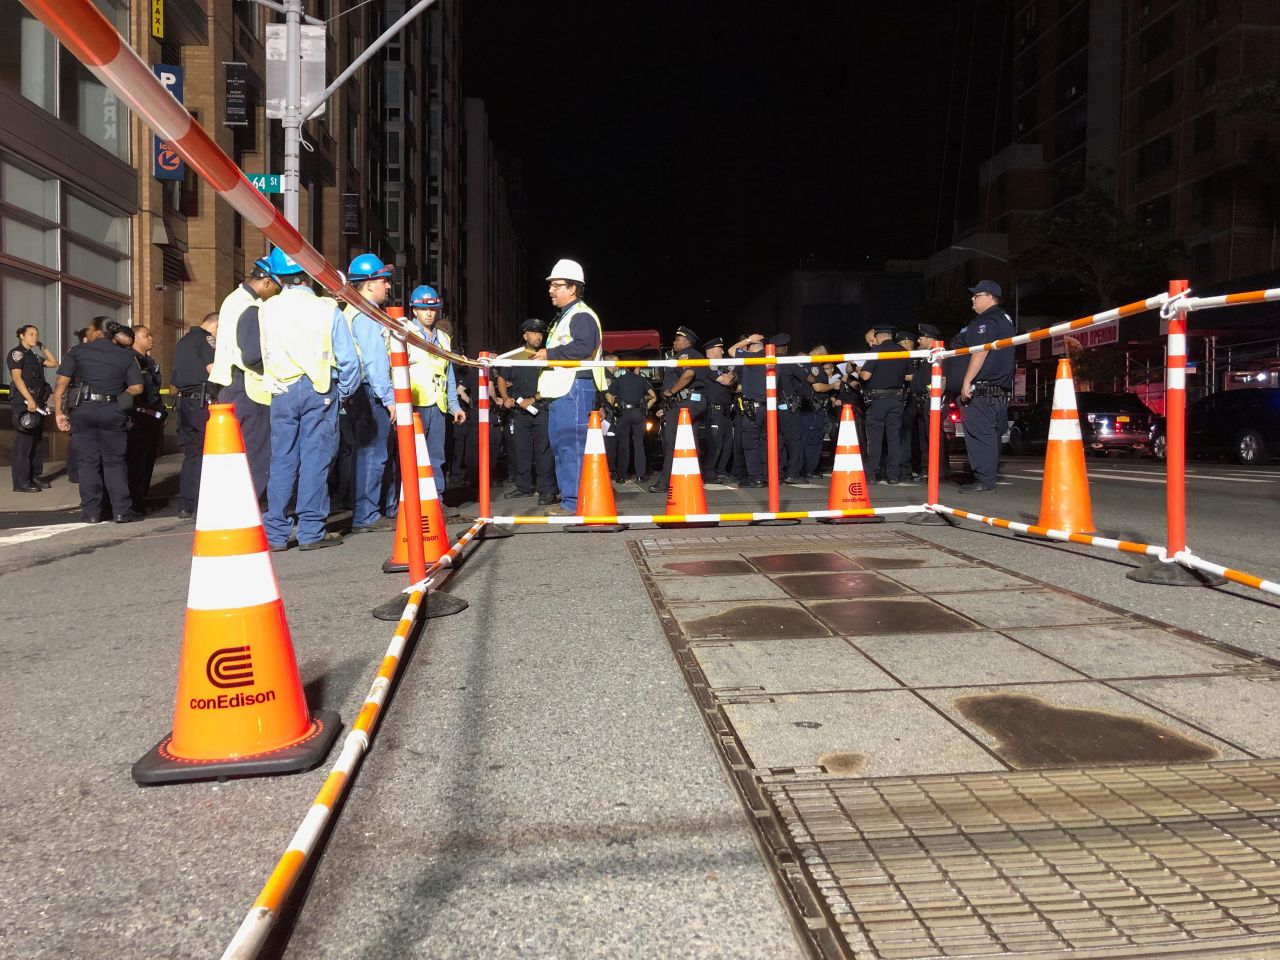 Con Edison workers stand around a barricaded transformer cover.